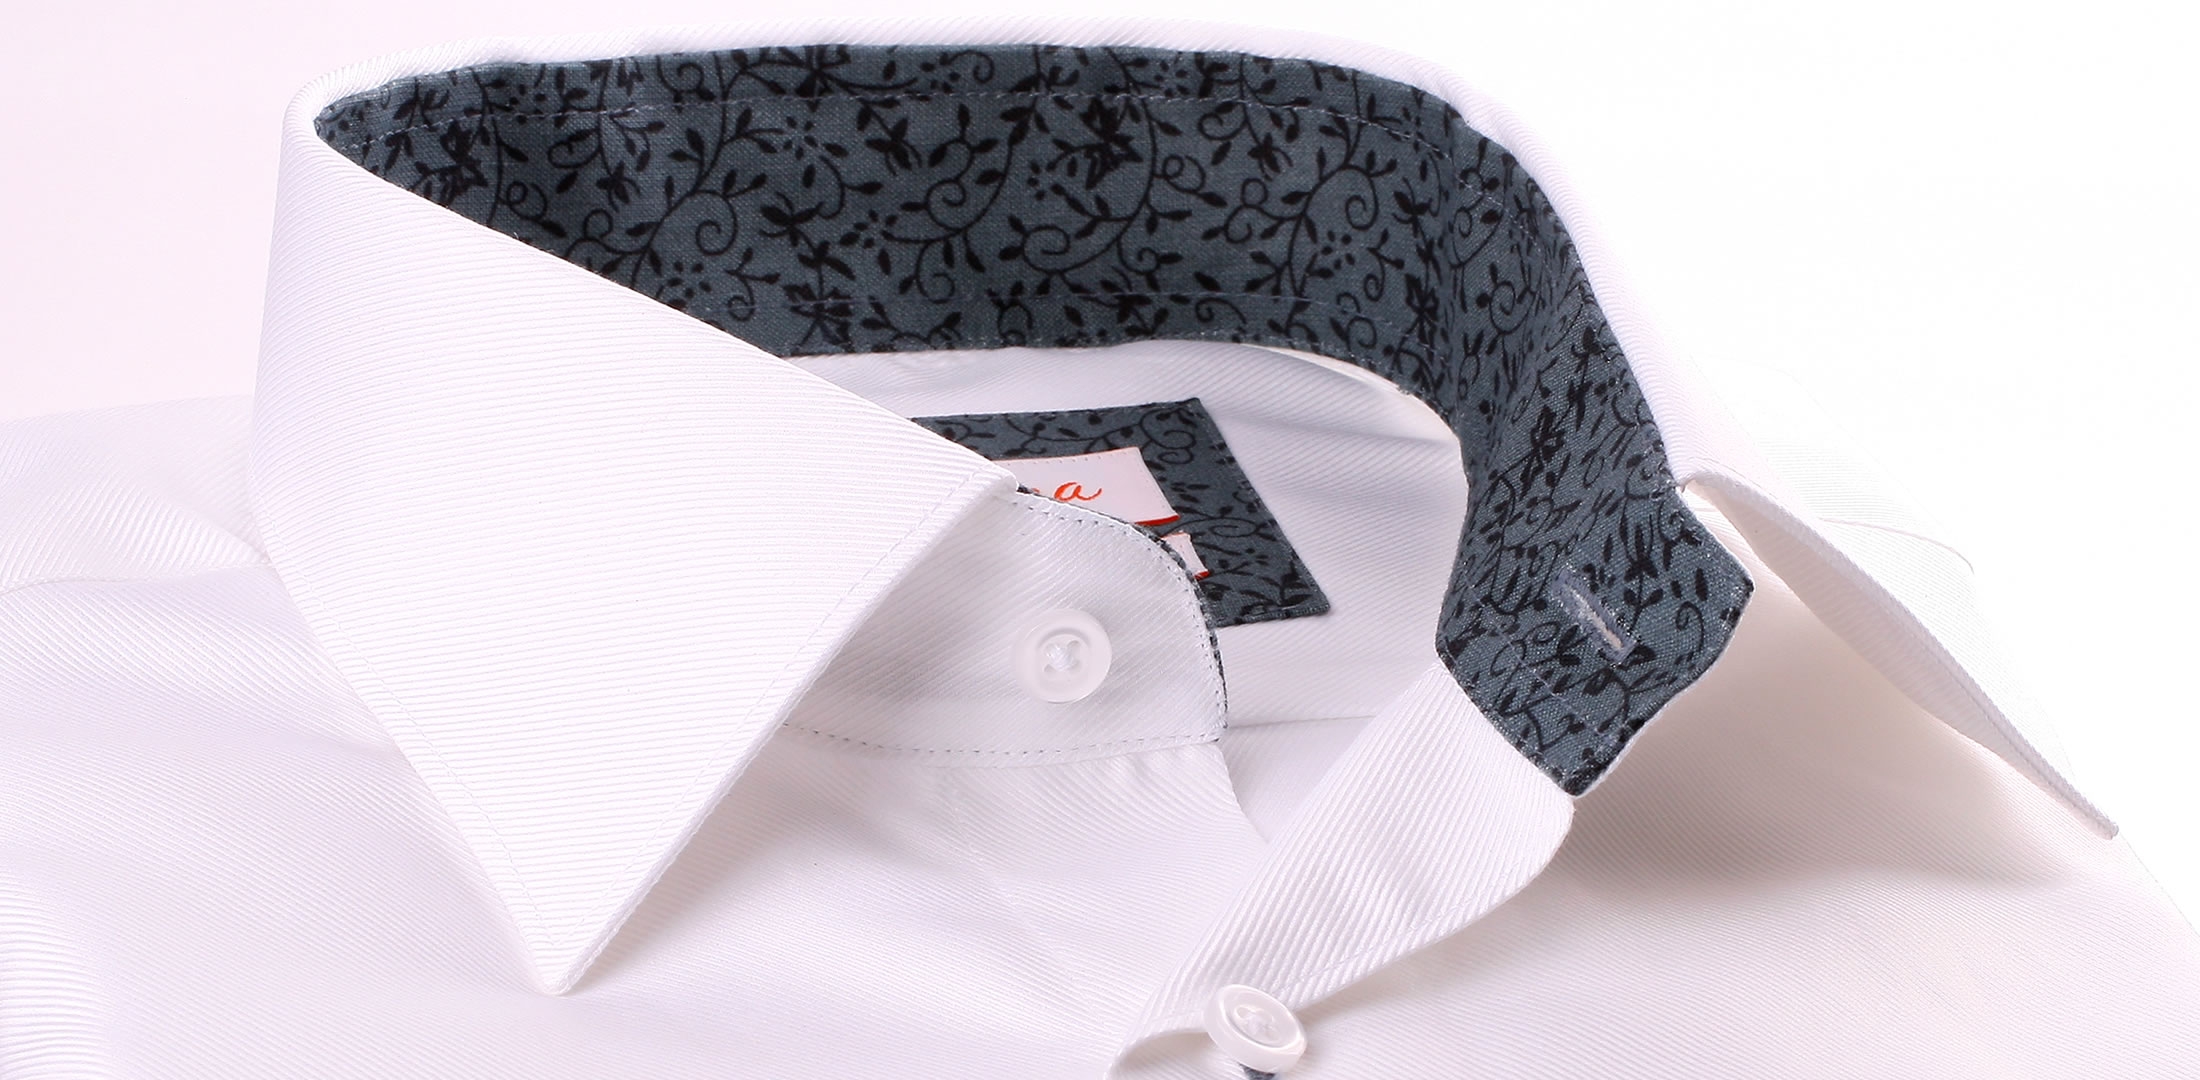 White french cuff shirt with grey patterns collar and cuffs